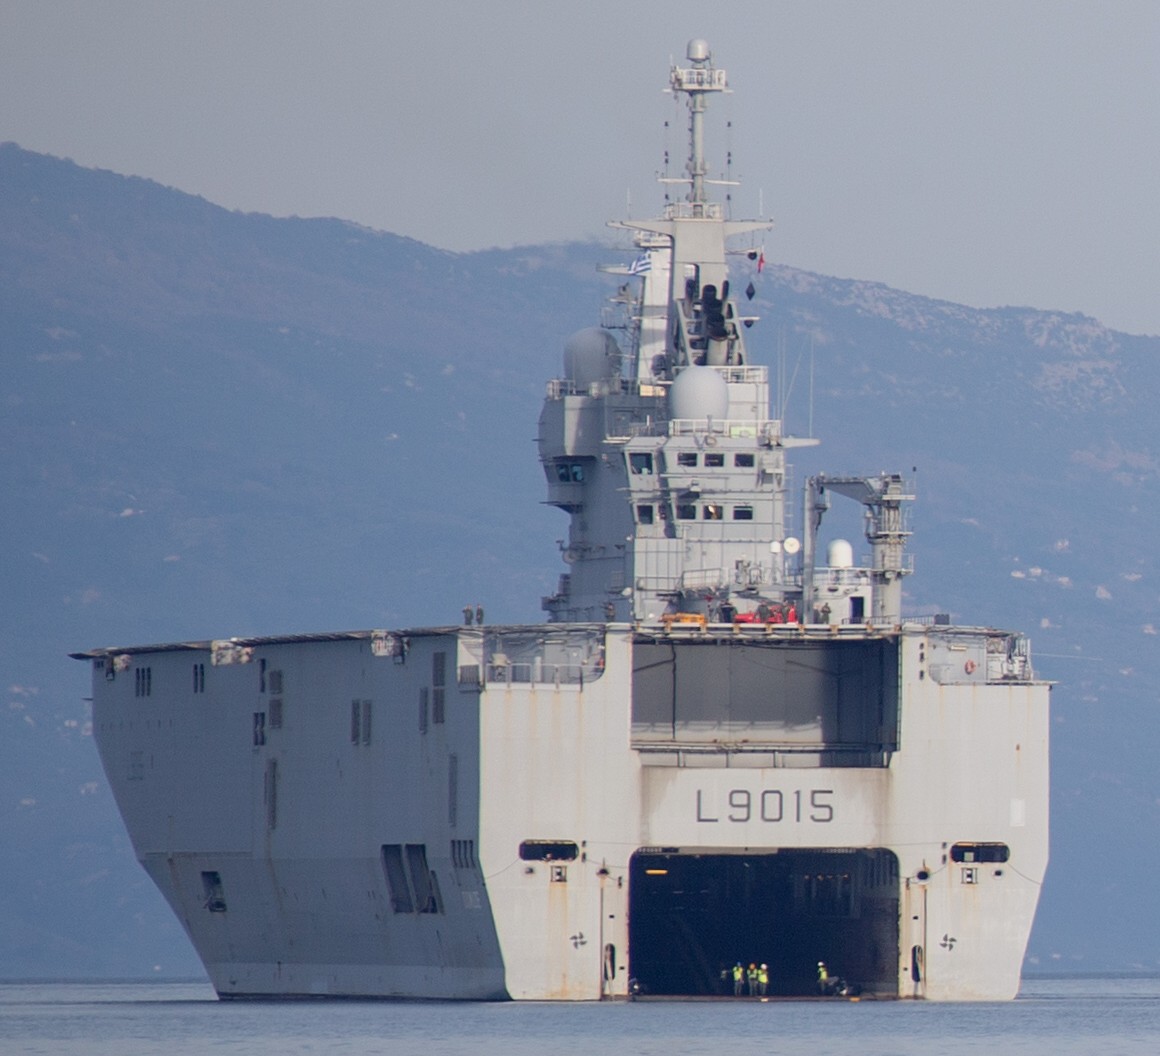 l-9015 fs dixmude mistral class amphibious assault command ship bpc french navy marine nationale 62